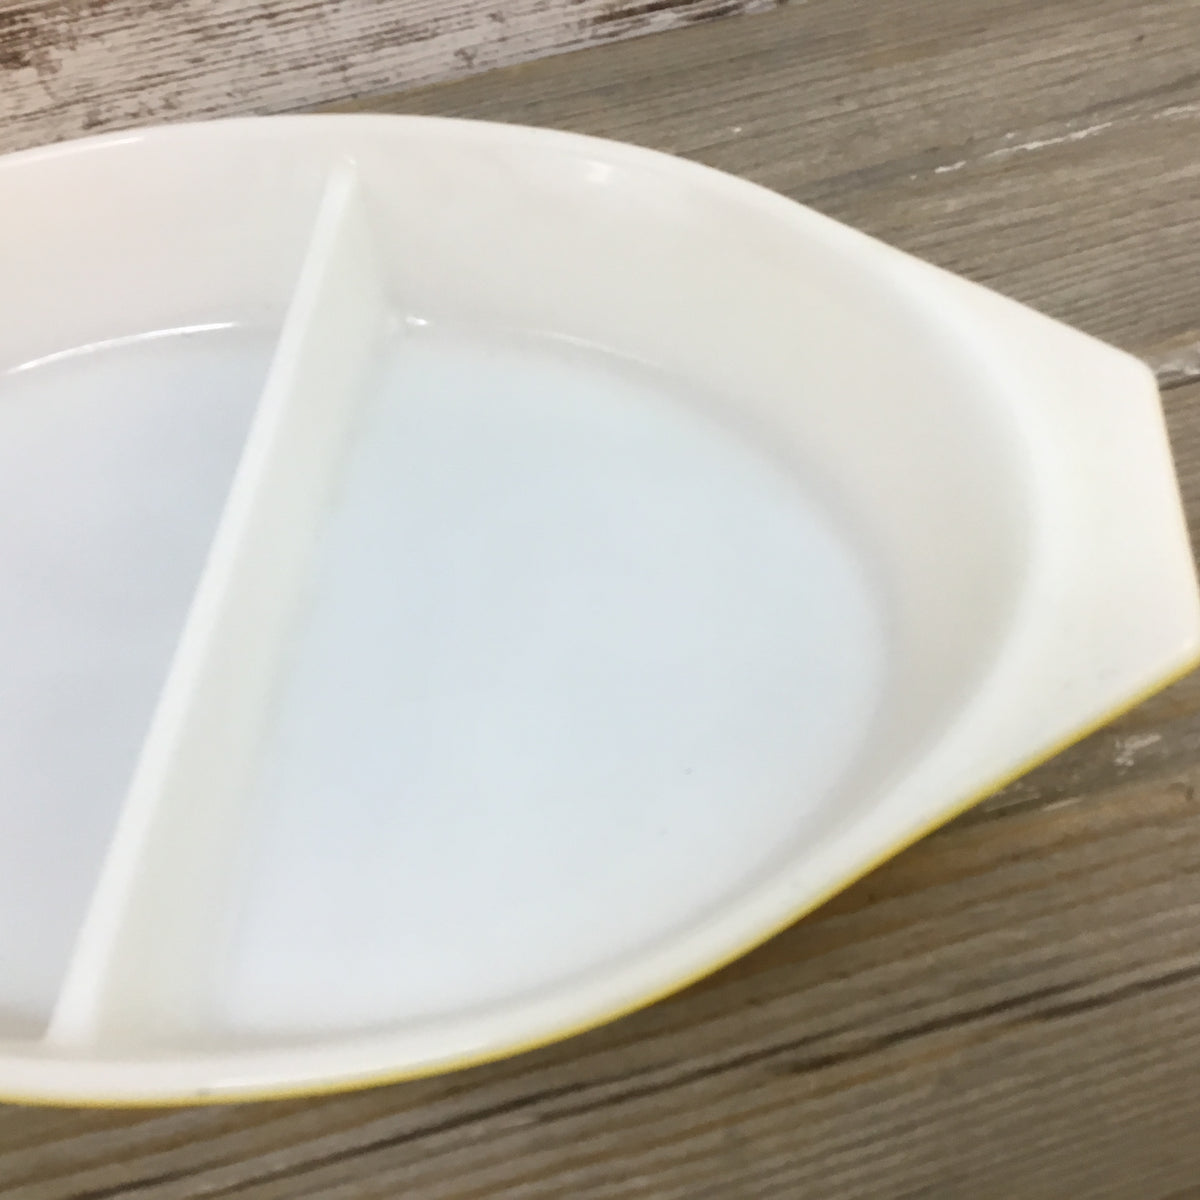 Vintage Pyrex Yellow Star 1 1/2 Qt Divided Casserole Dish – The